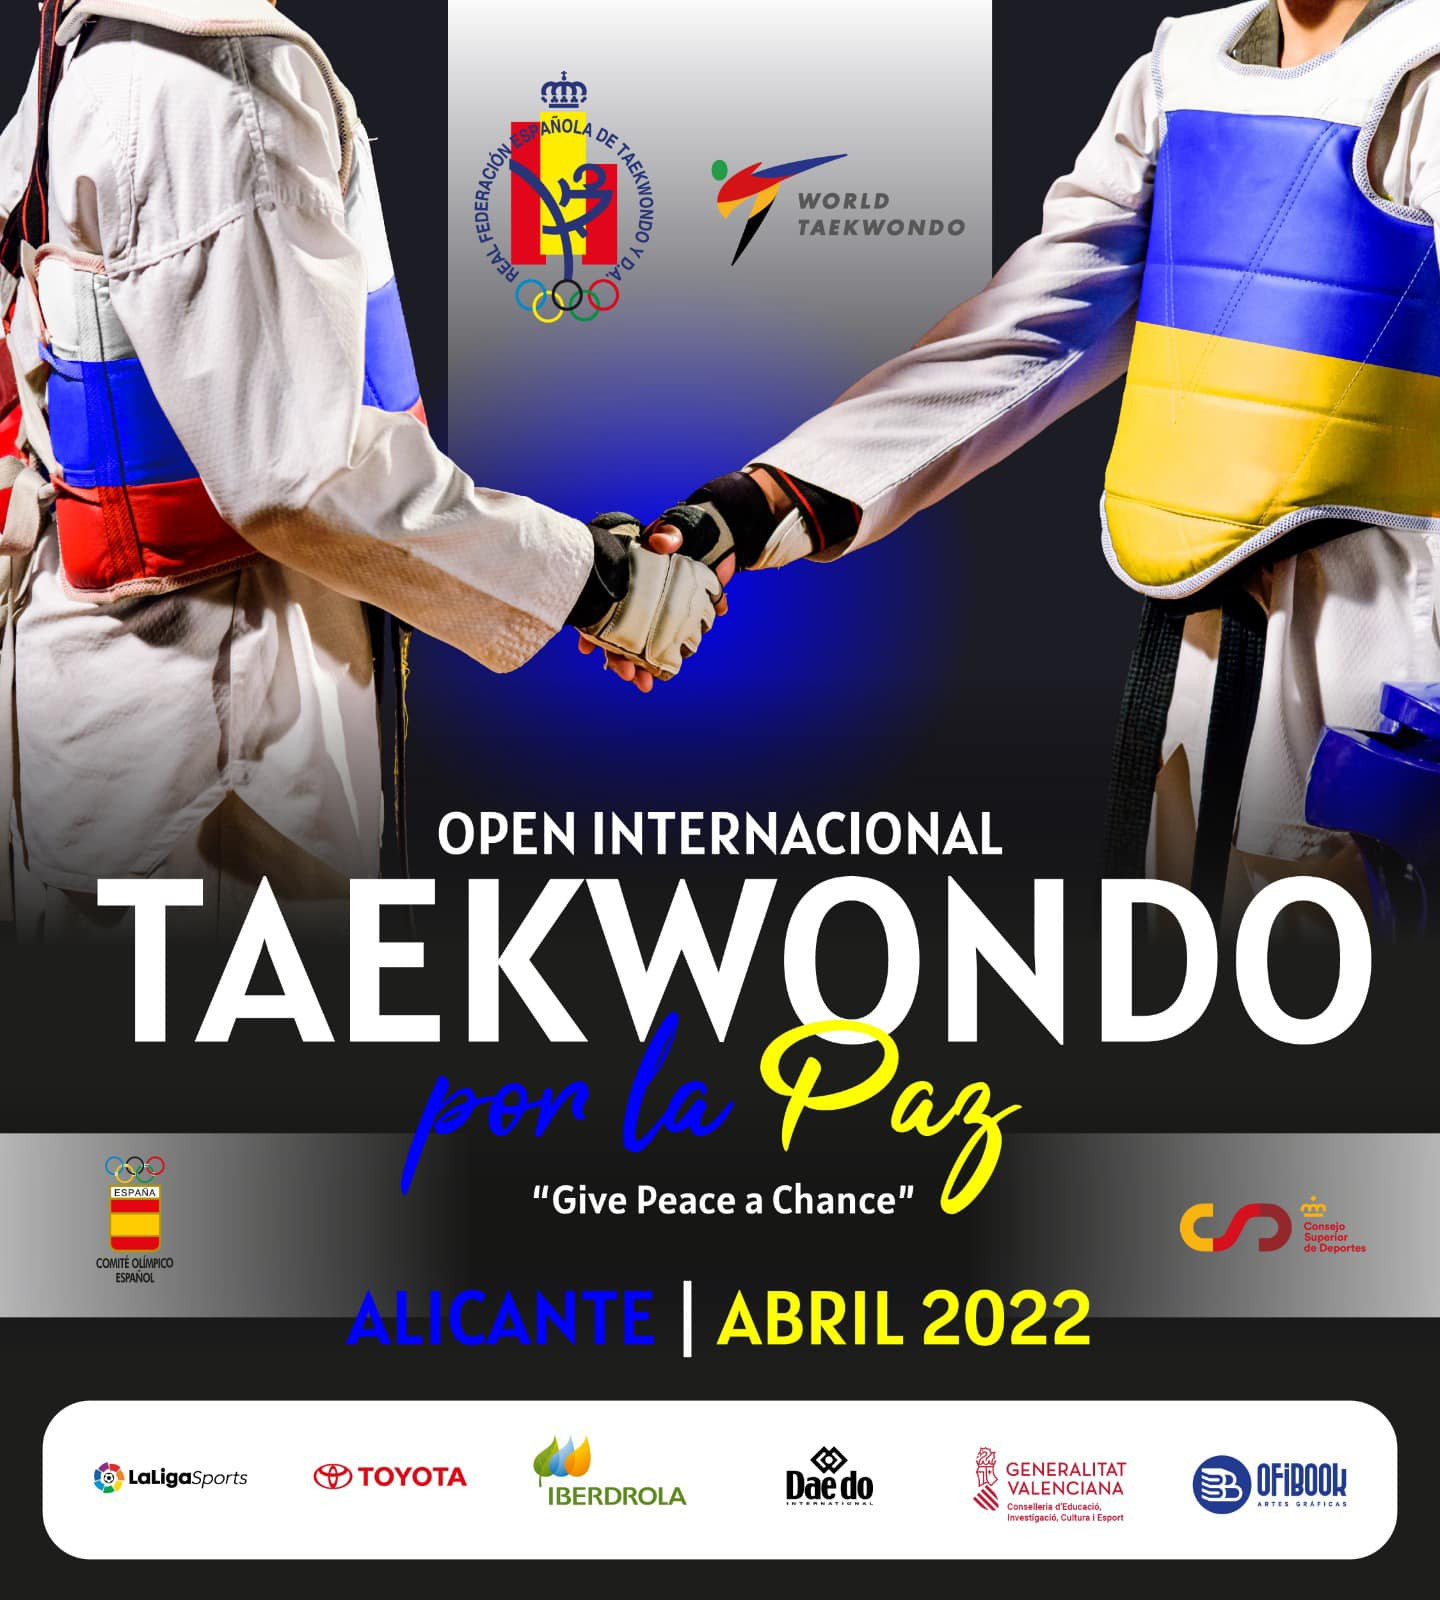 The Royal Spanish Taekwondo Federation is hosting an event in Alicante to help refugees from Ukraine ©RFET